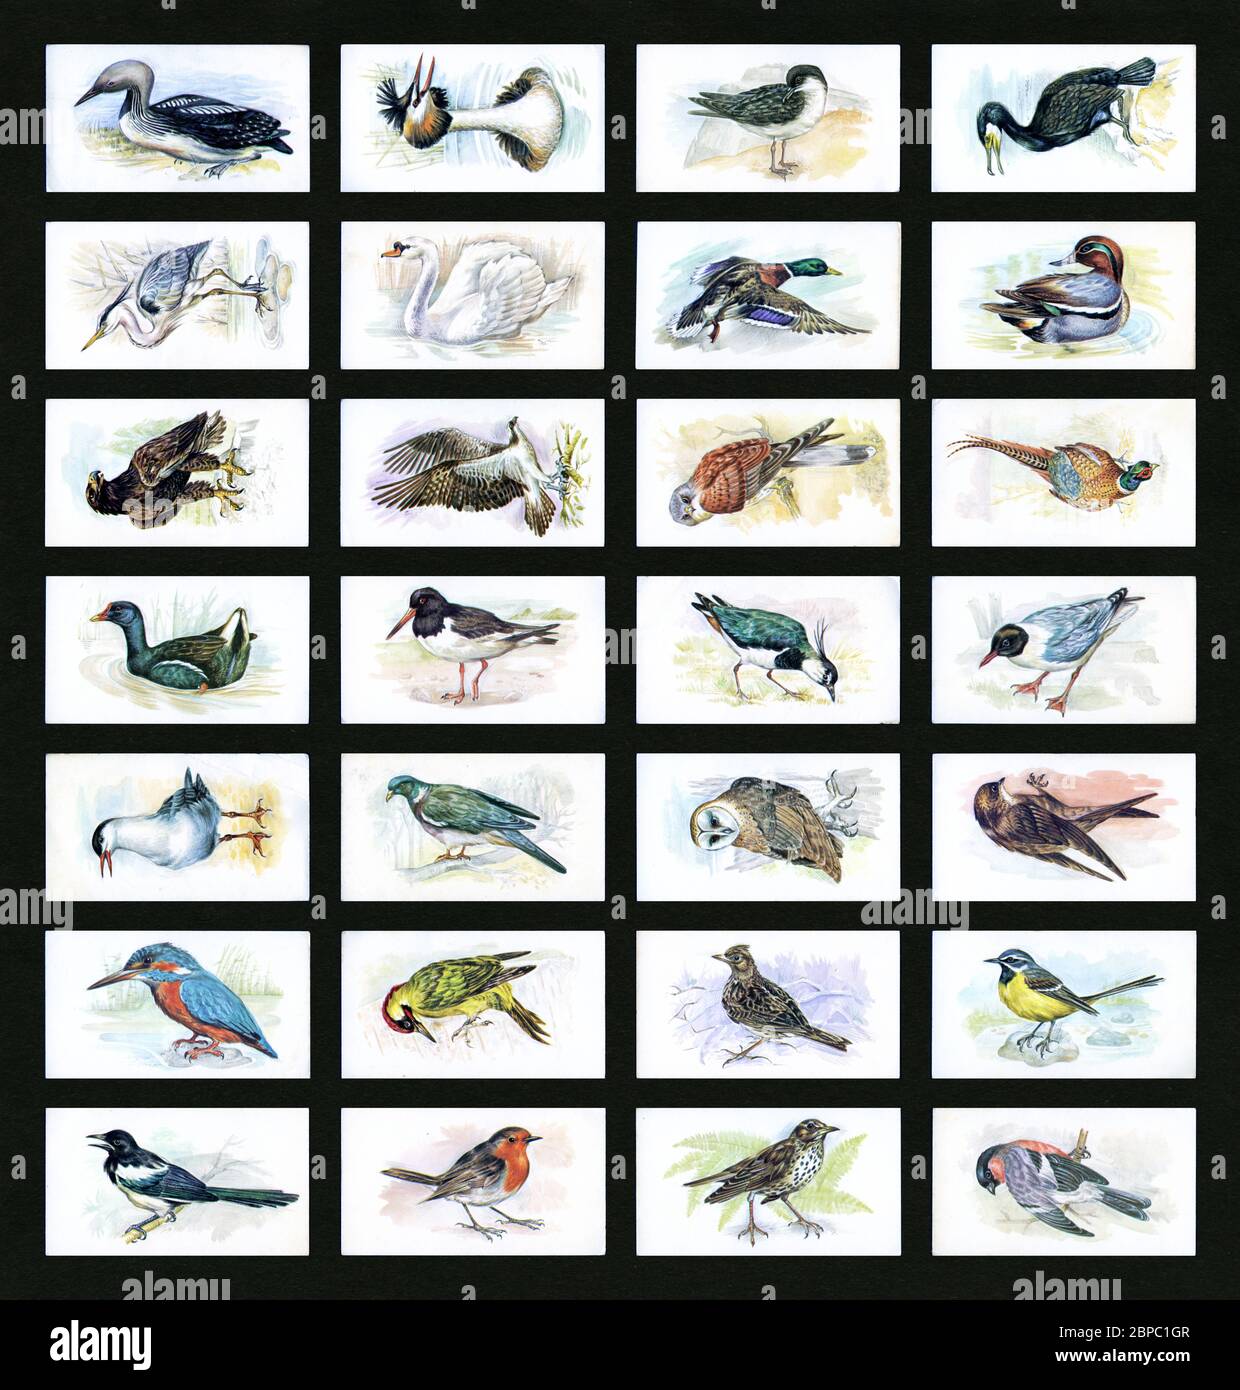 'British Birds Collection' cards (28 from set of 32, 1980, see additional info), issued by Grandee Cigars, John Player & Sons (Imperial Tobacco) Stock Photo